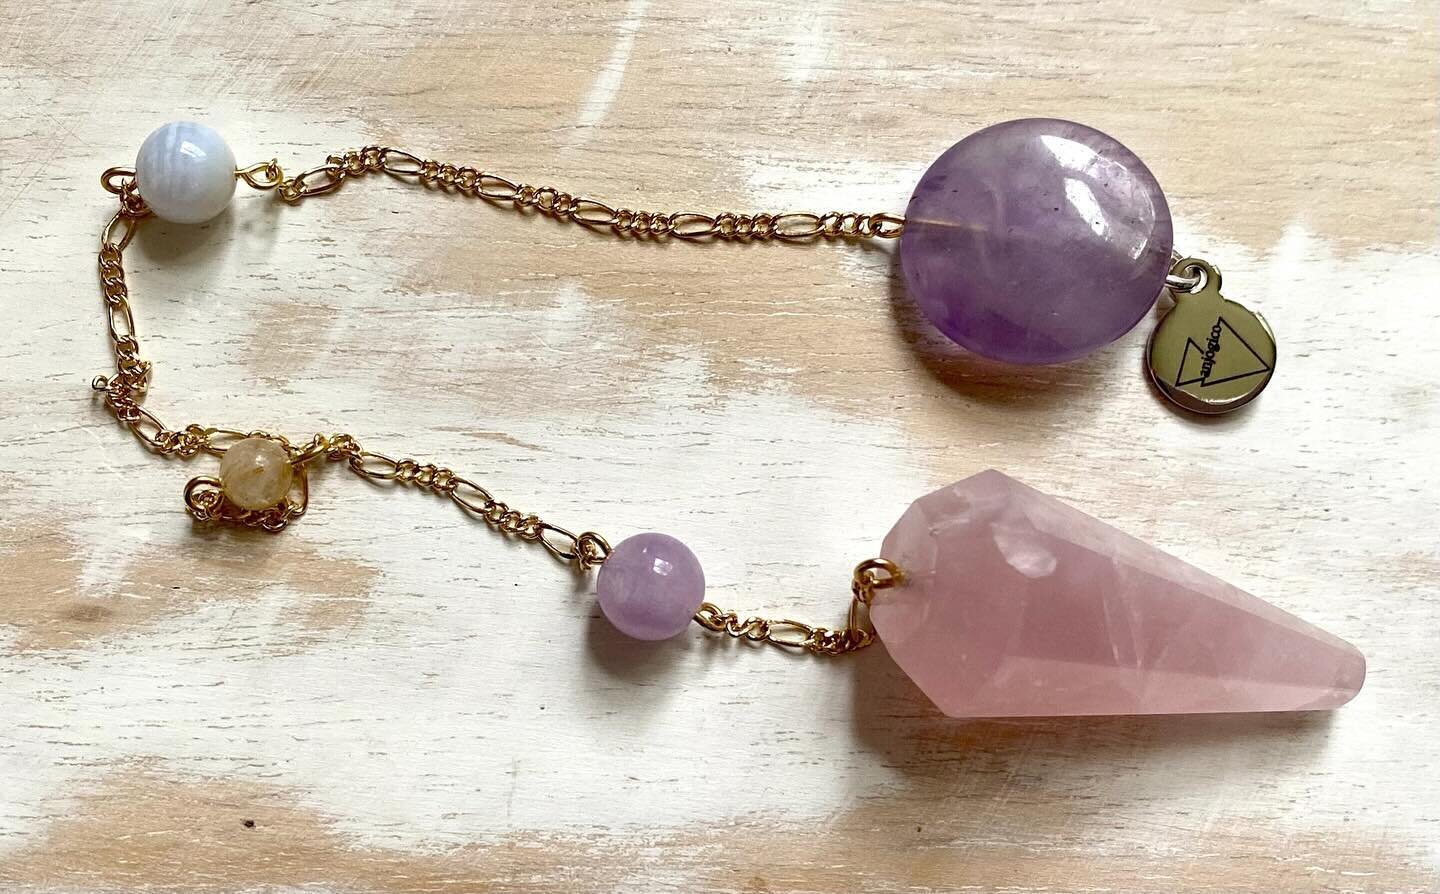 Swipe to see what stones we included in this beautiful pendulum 🤫😉 #smallbusiness #customjewelry #pendulums